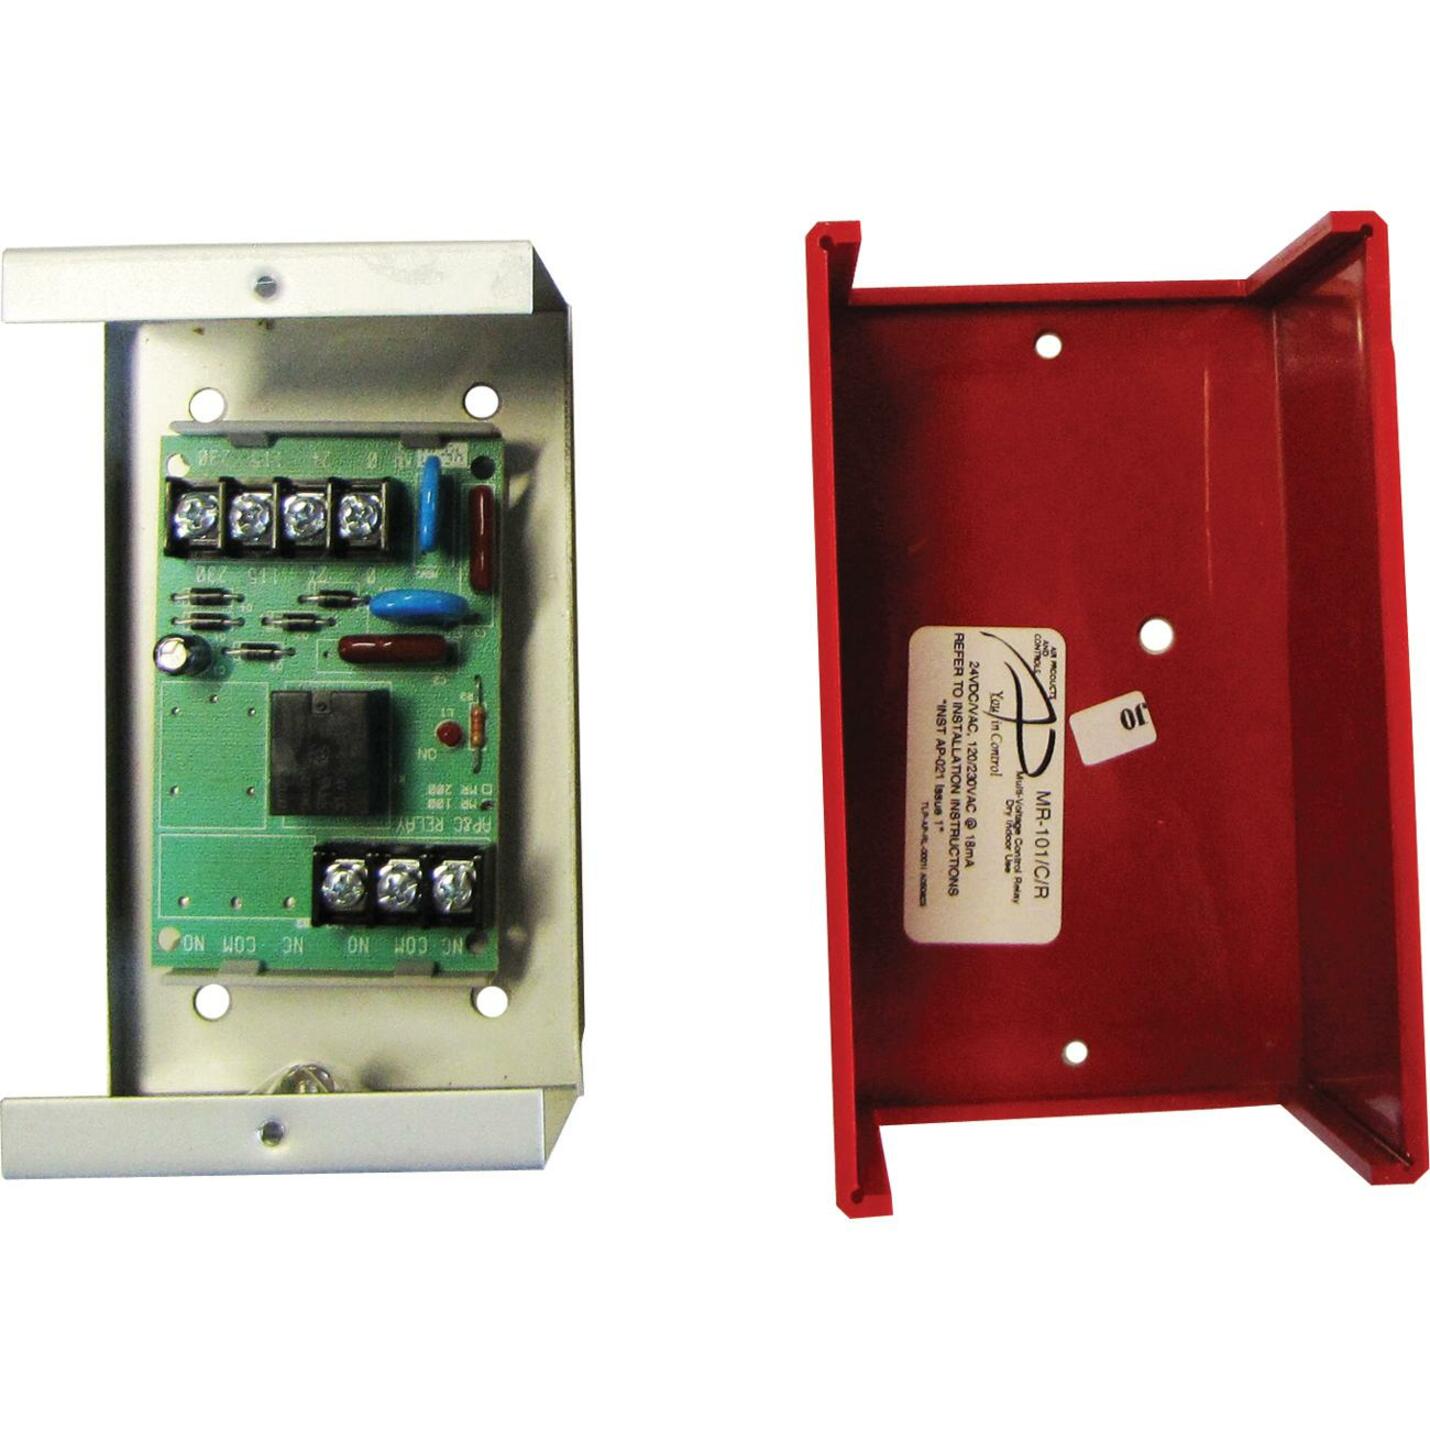 Fire-Lite MR-101/CR SPDT Relay, 3 Year Limited Warranty, UL Recognized, Track Mounting Hardware